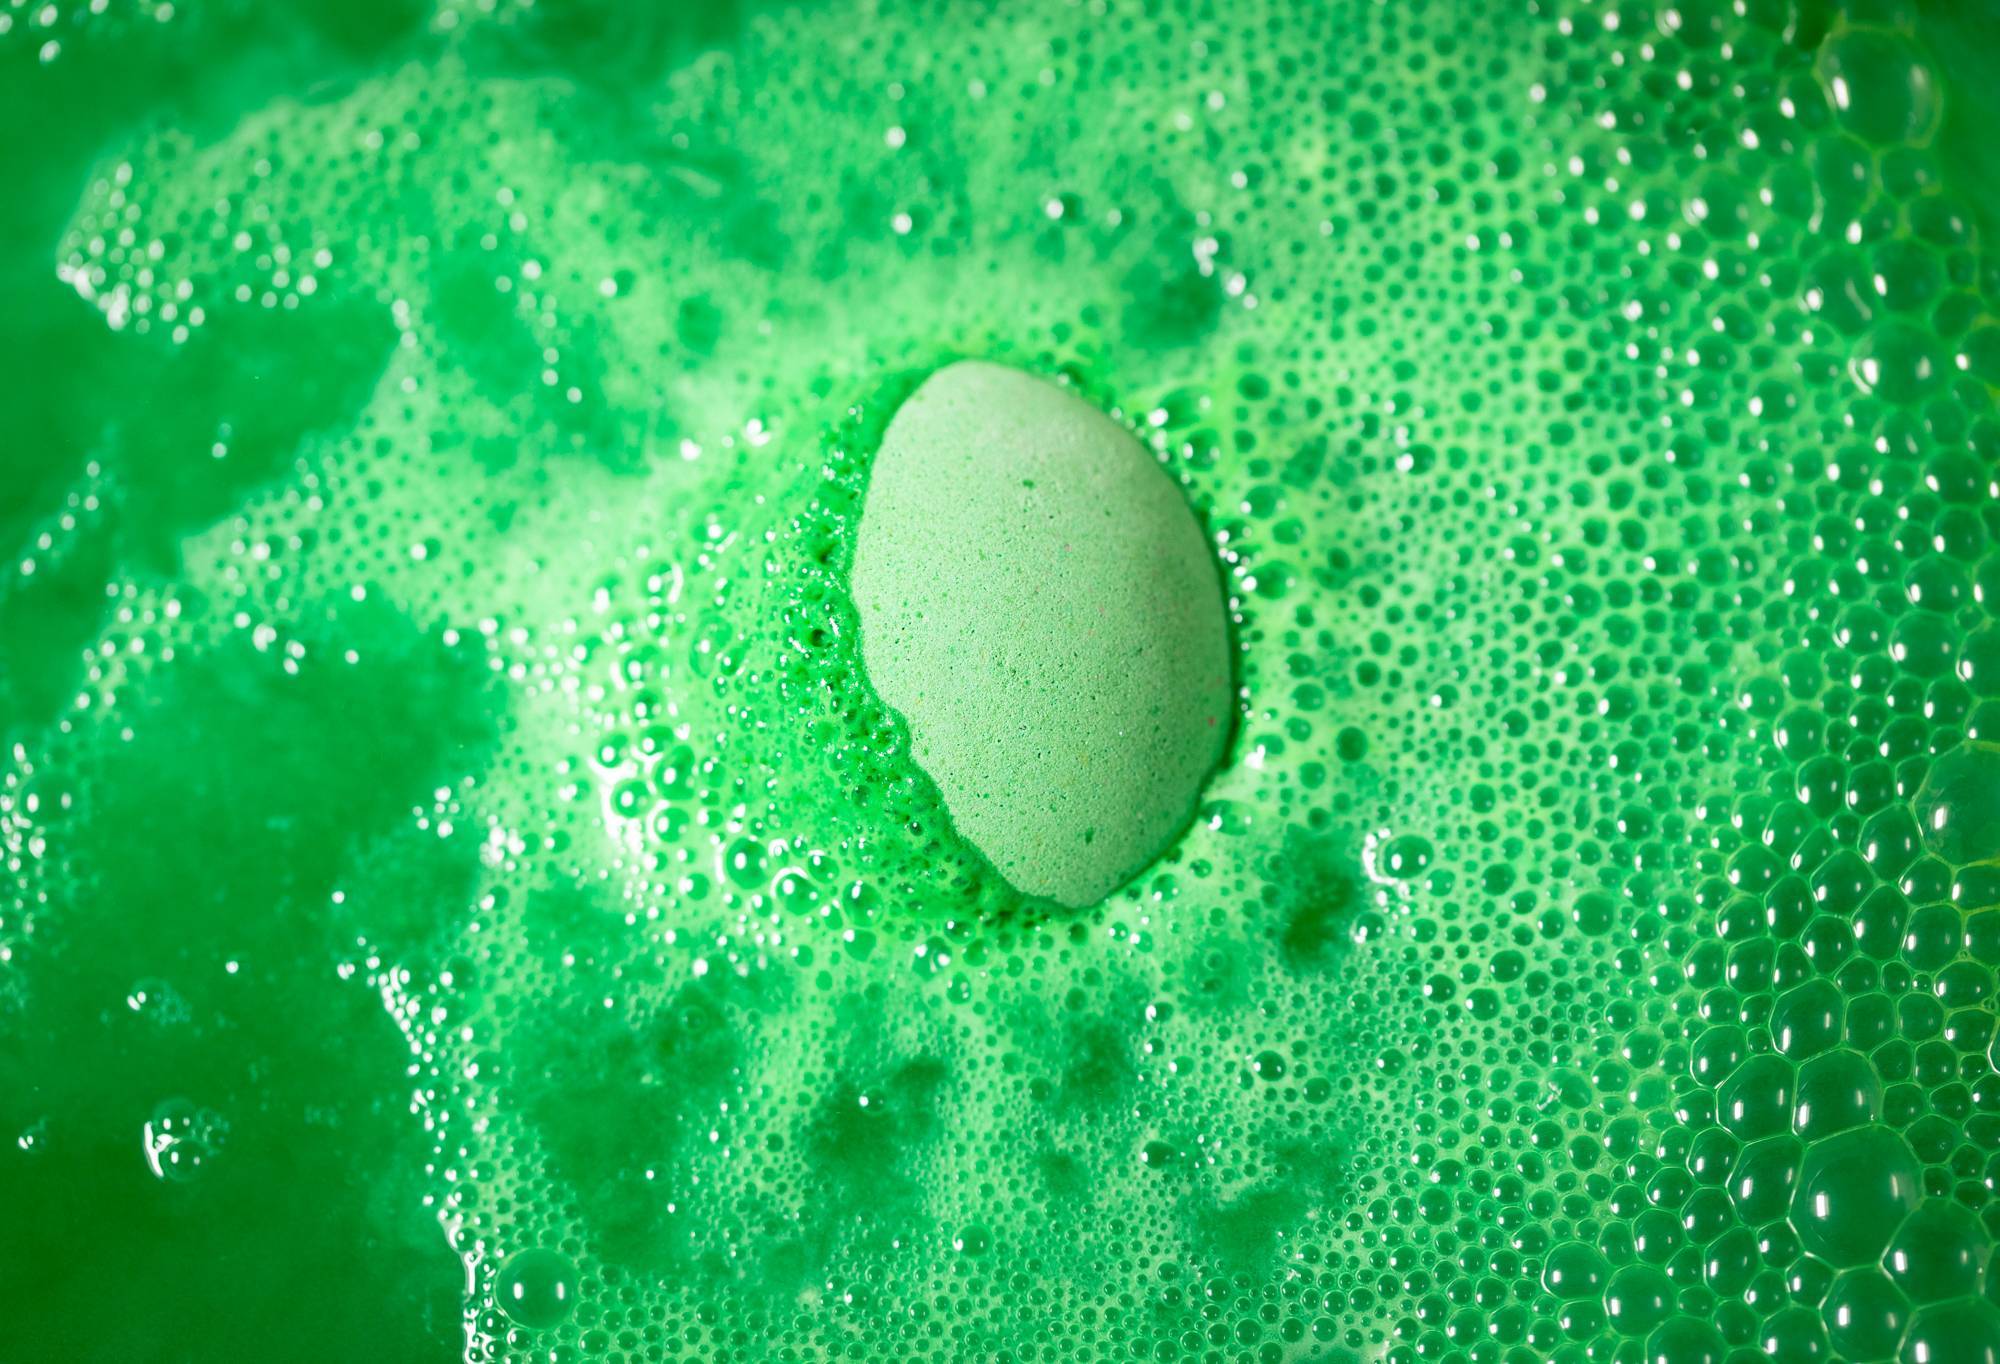 Wild Remedy bath bomb is slowly dissolving as it creates bright, lime-green foamy bubbles and water. 